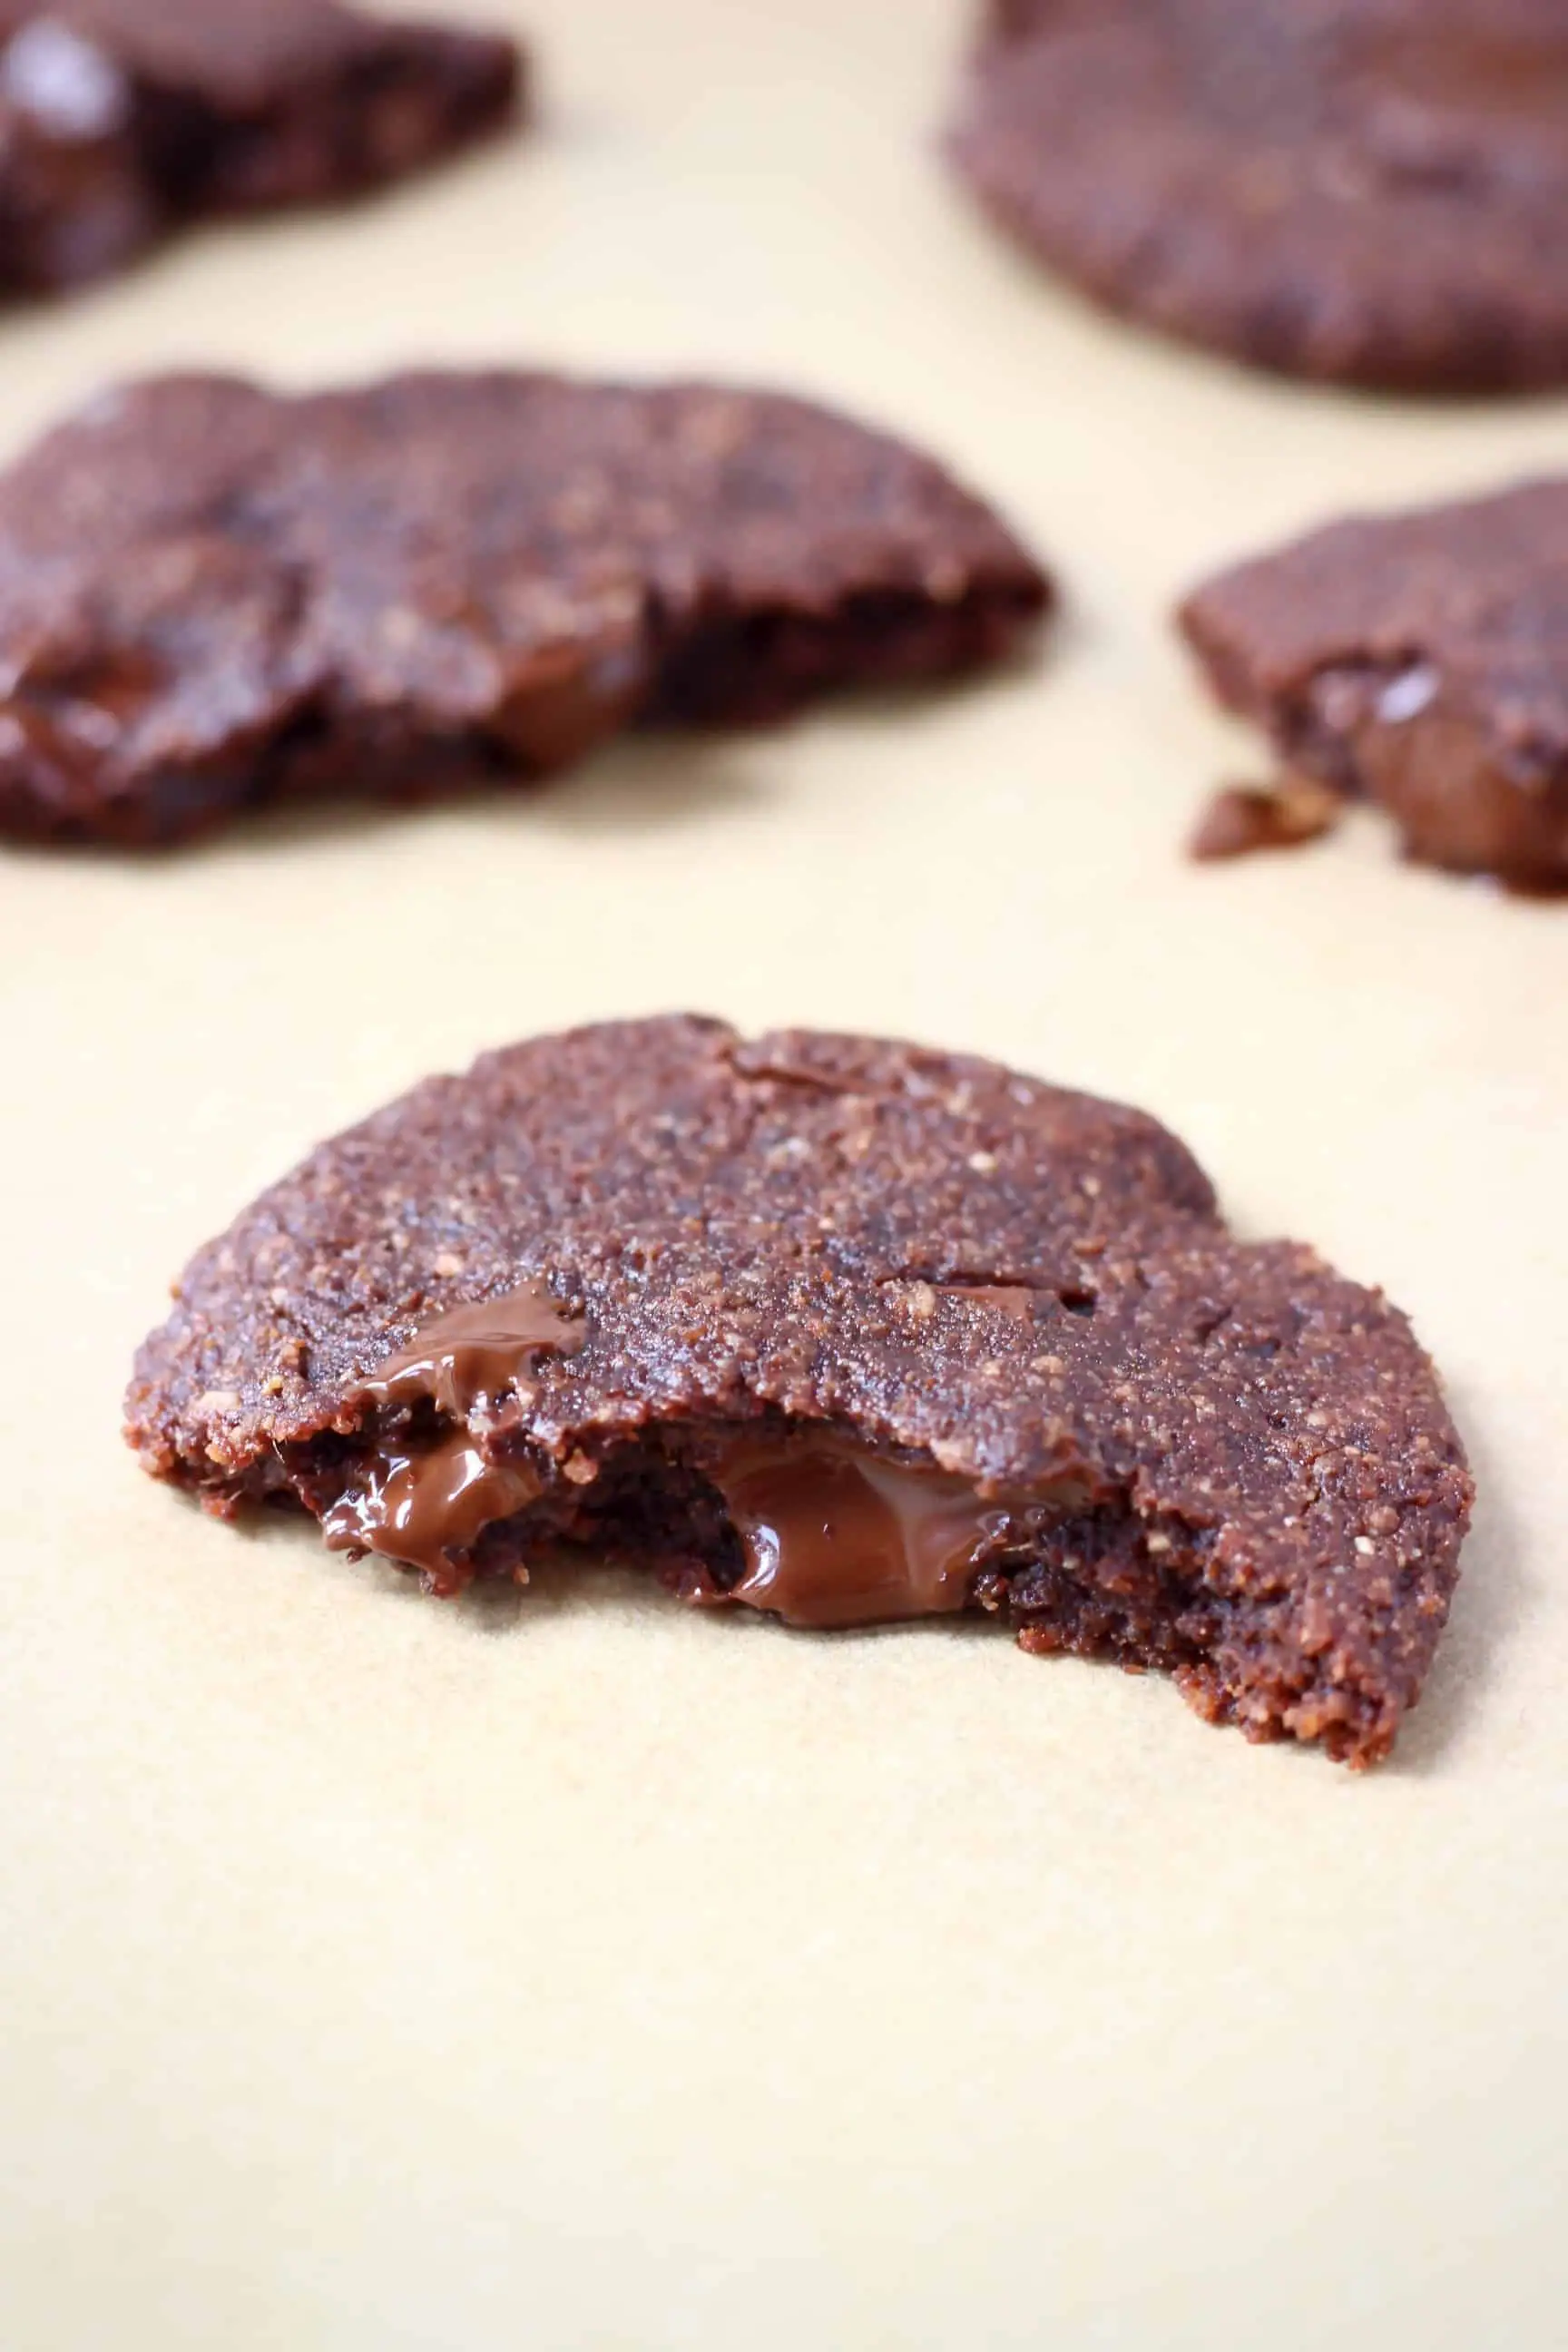 A halved chocolate cookie on a sheet of brown baking paper